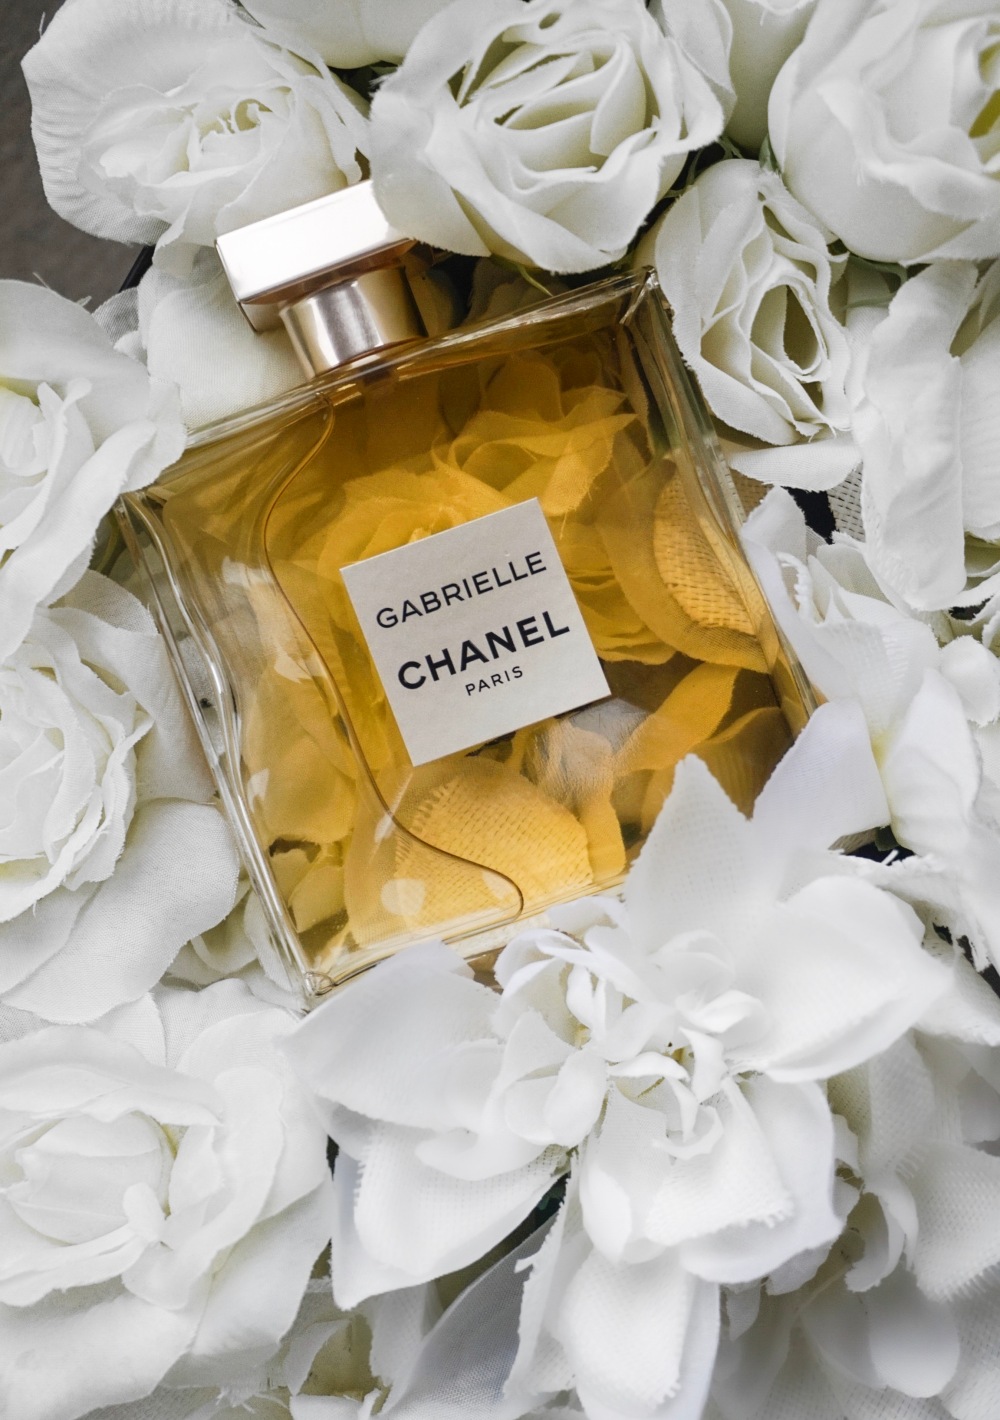 A breakdown of the new Gabrielle Chanel fragrance by Chanel